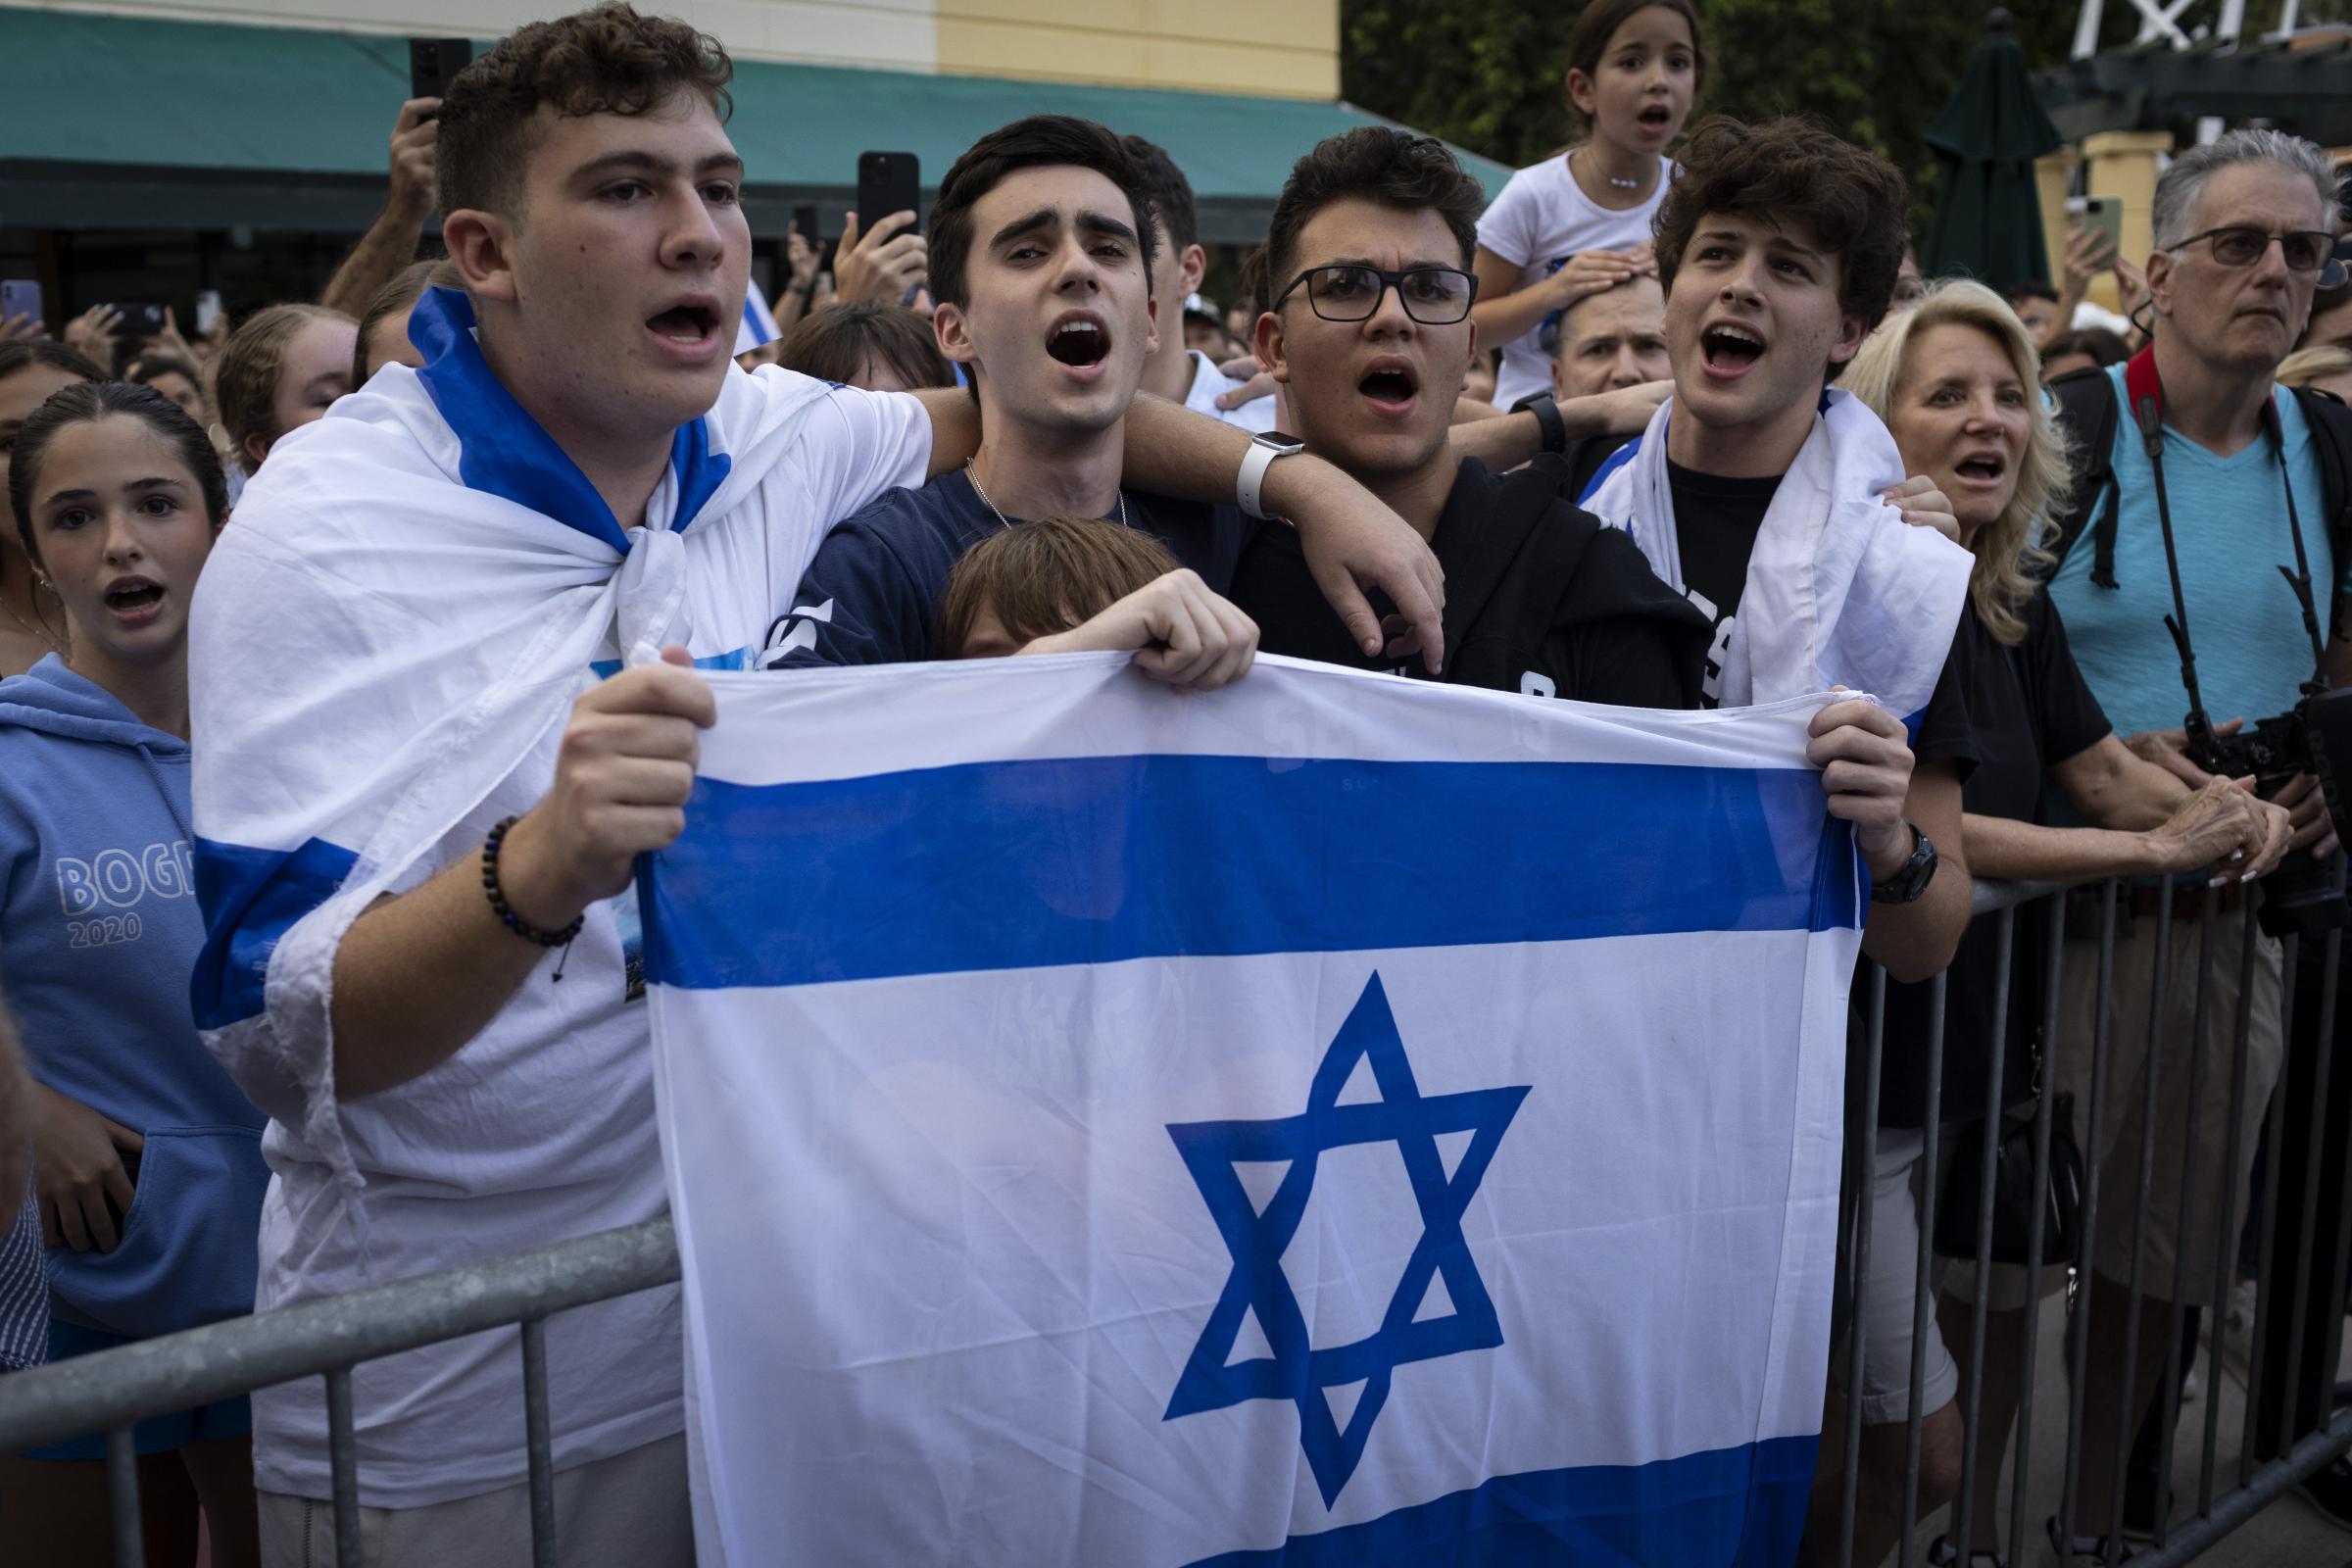 Pro-Israel demonstrations in South Florida - People attend a gathering in support of Israel in...